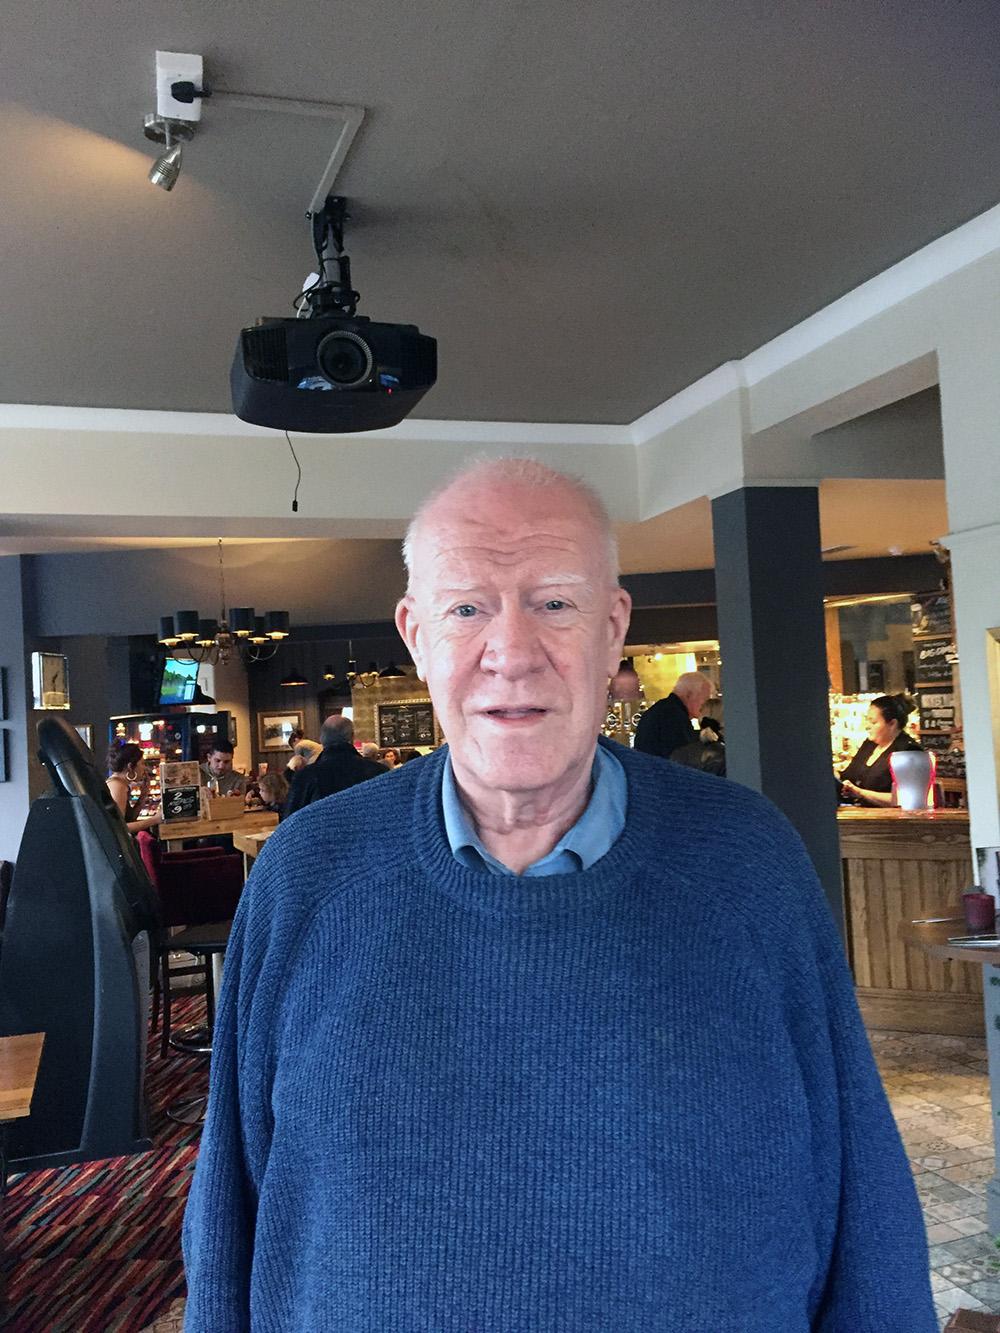 Tim Glover, 73, retired, from Chandlers Ford, said: "They should be allowed. I can't see any political or other reason why they shouldn't be. It's a remembrance to the people in the world wars and since. I agree with Theresa May that Fifa should keep thei